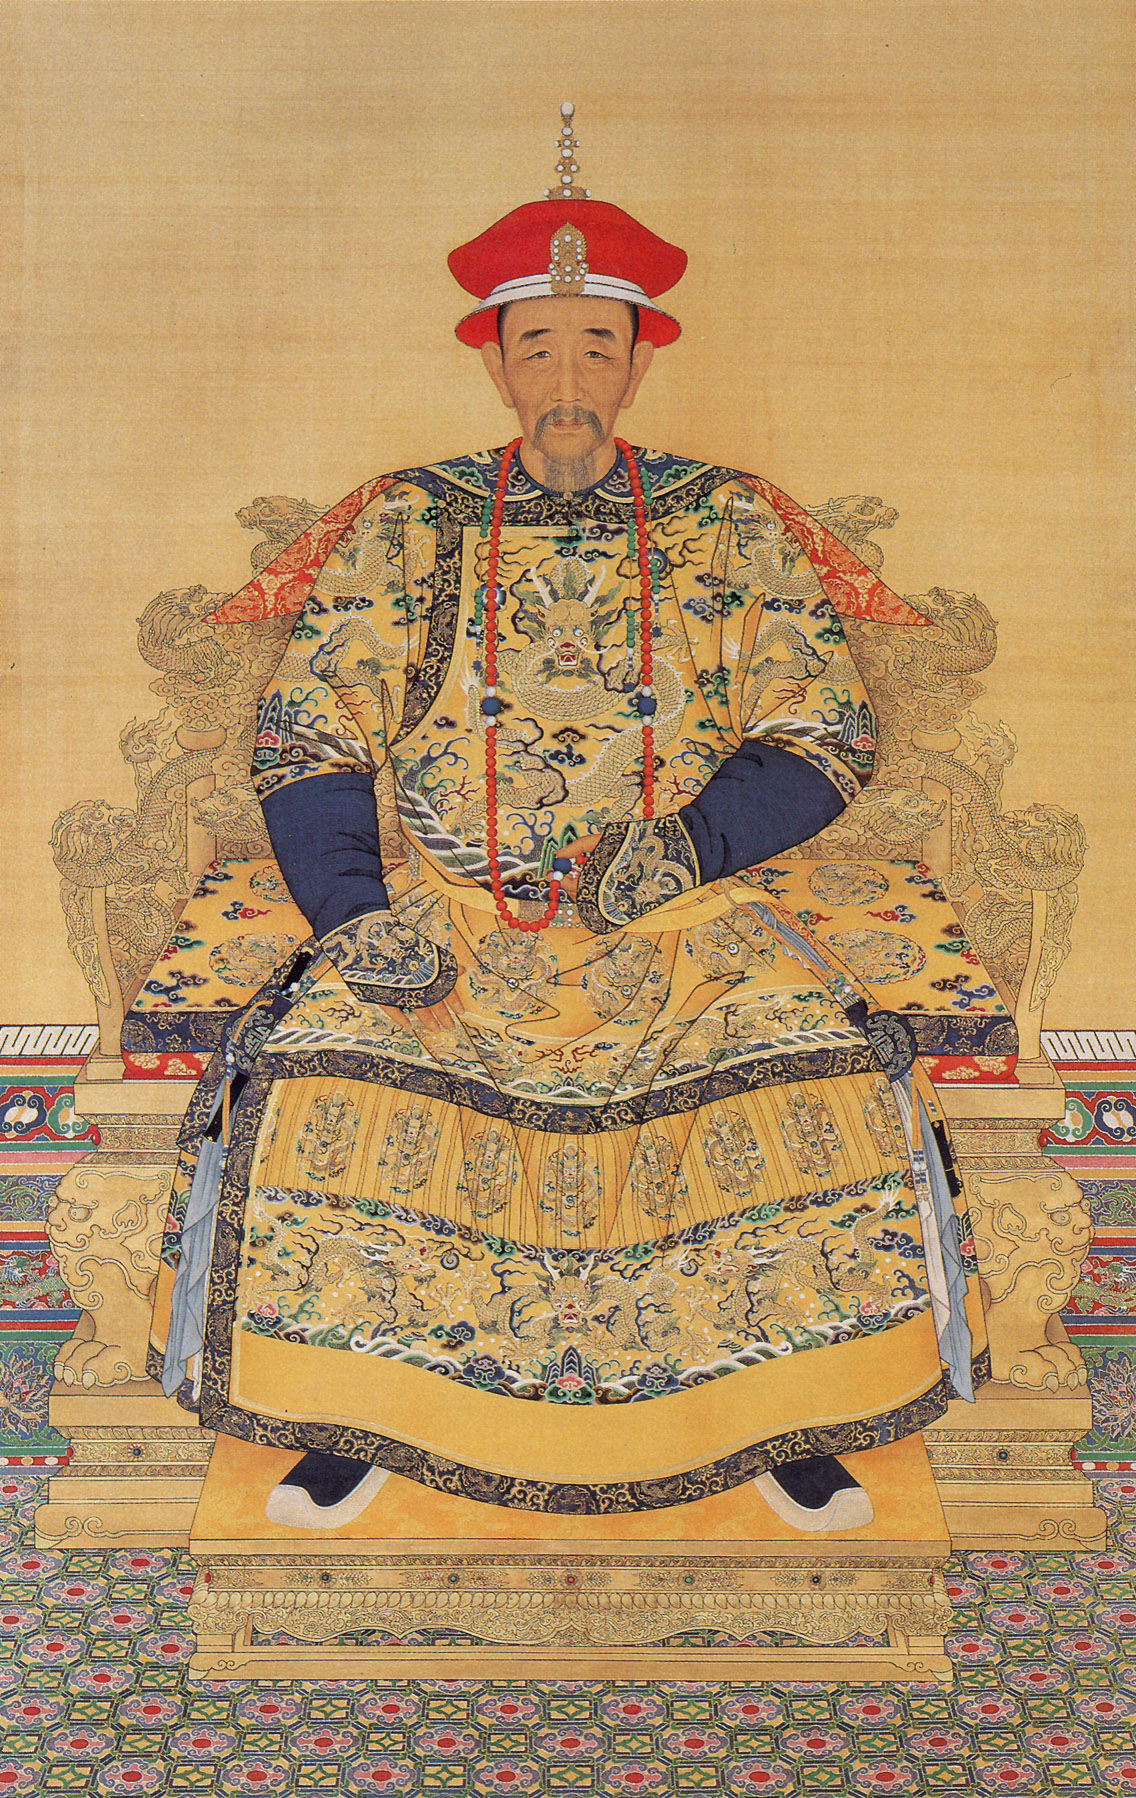 Emperor Kangxi of the Qing Dynasty. (Public Domain)